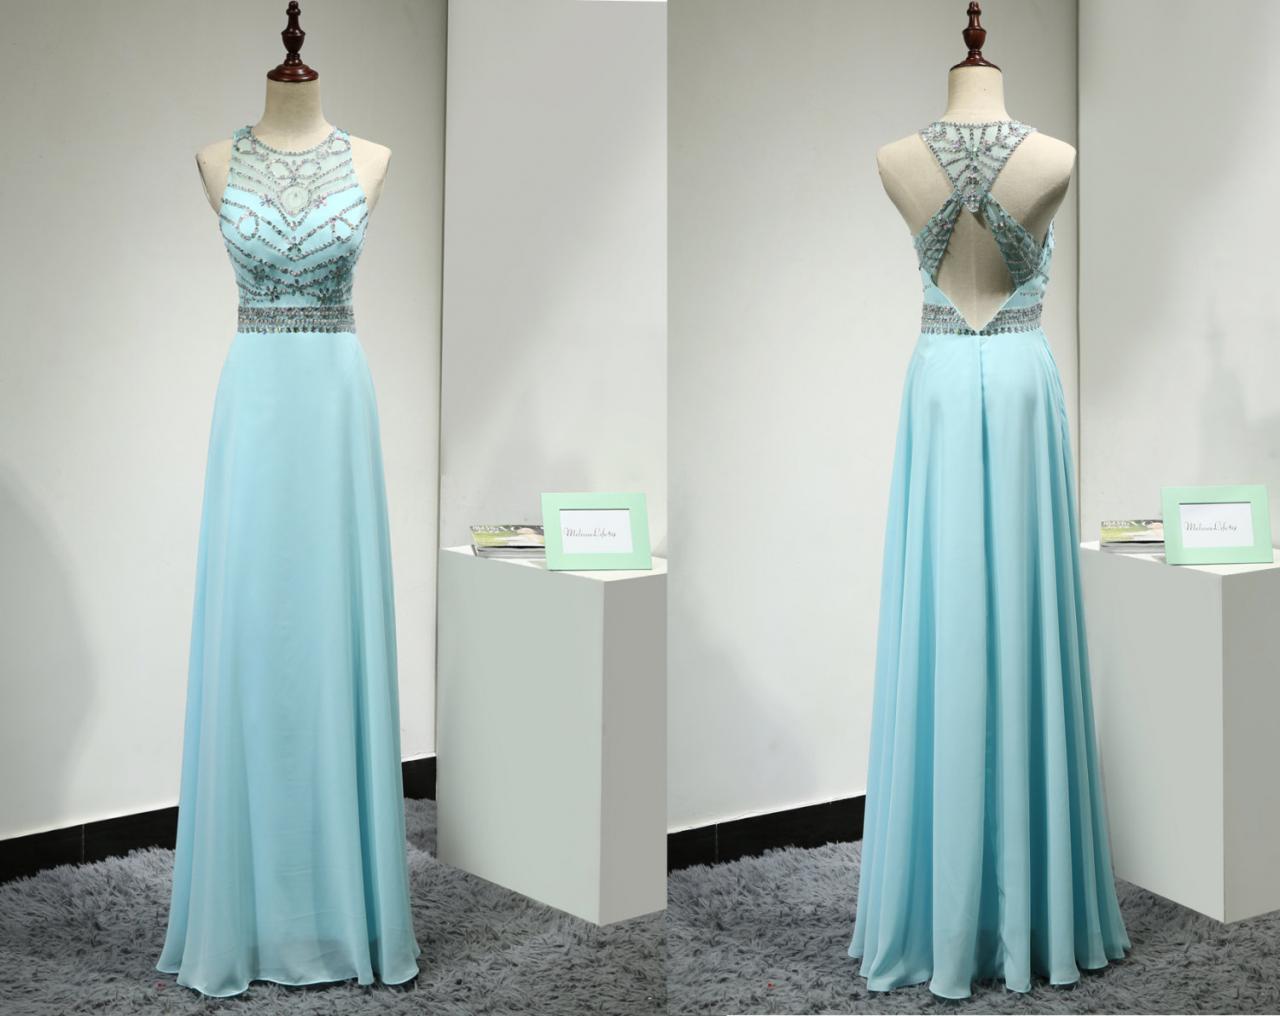 Light Blue Prom Dresses,prom Gowns,sparkle Prom Dresses,2016 Party Dresses,long Prom Gown,prom Dress,sparkly Evening Gowns,glitter Prom Gowns